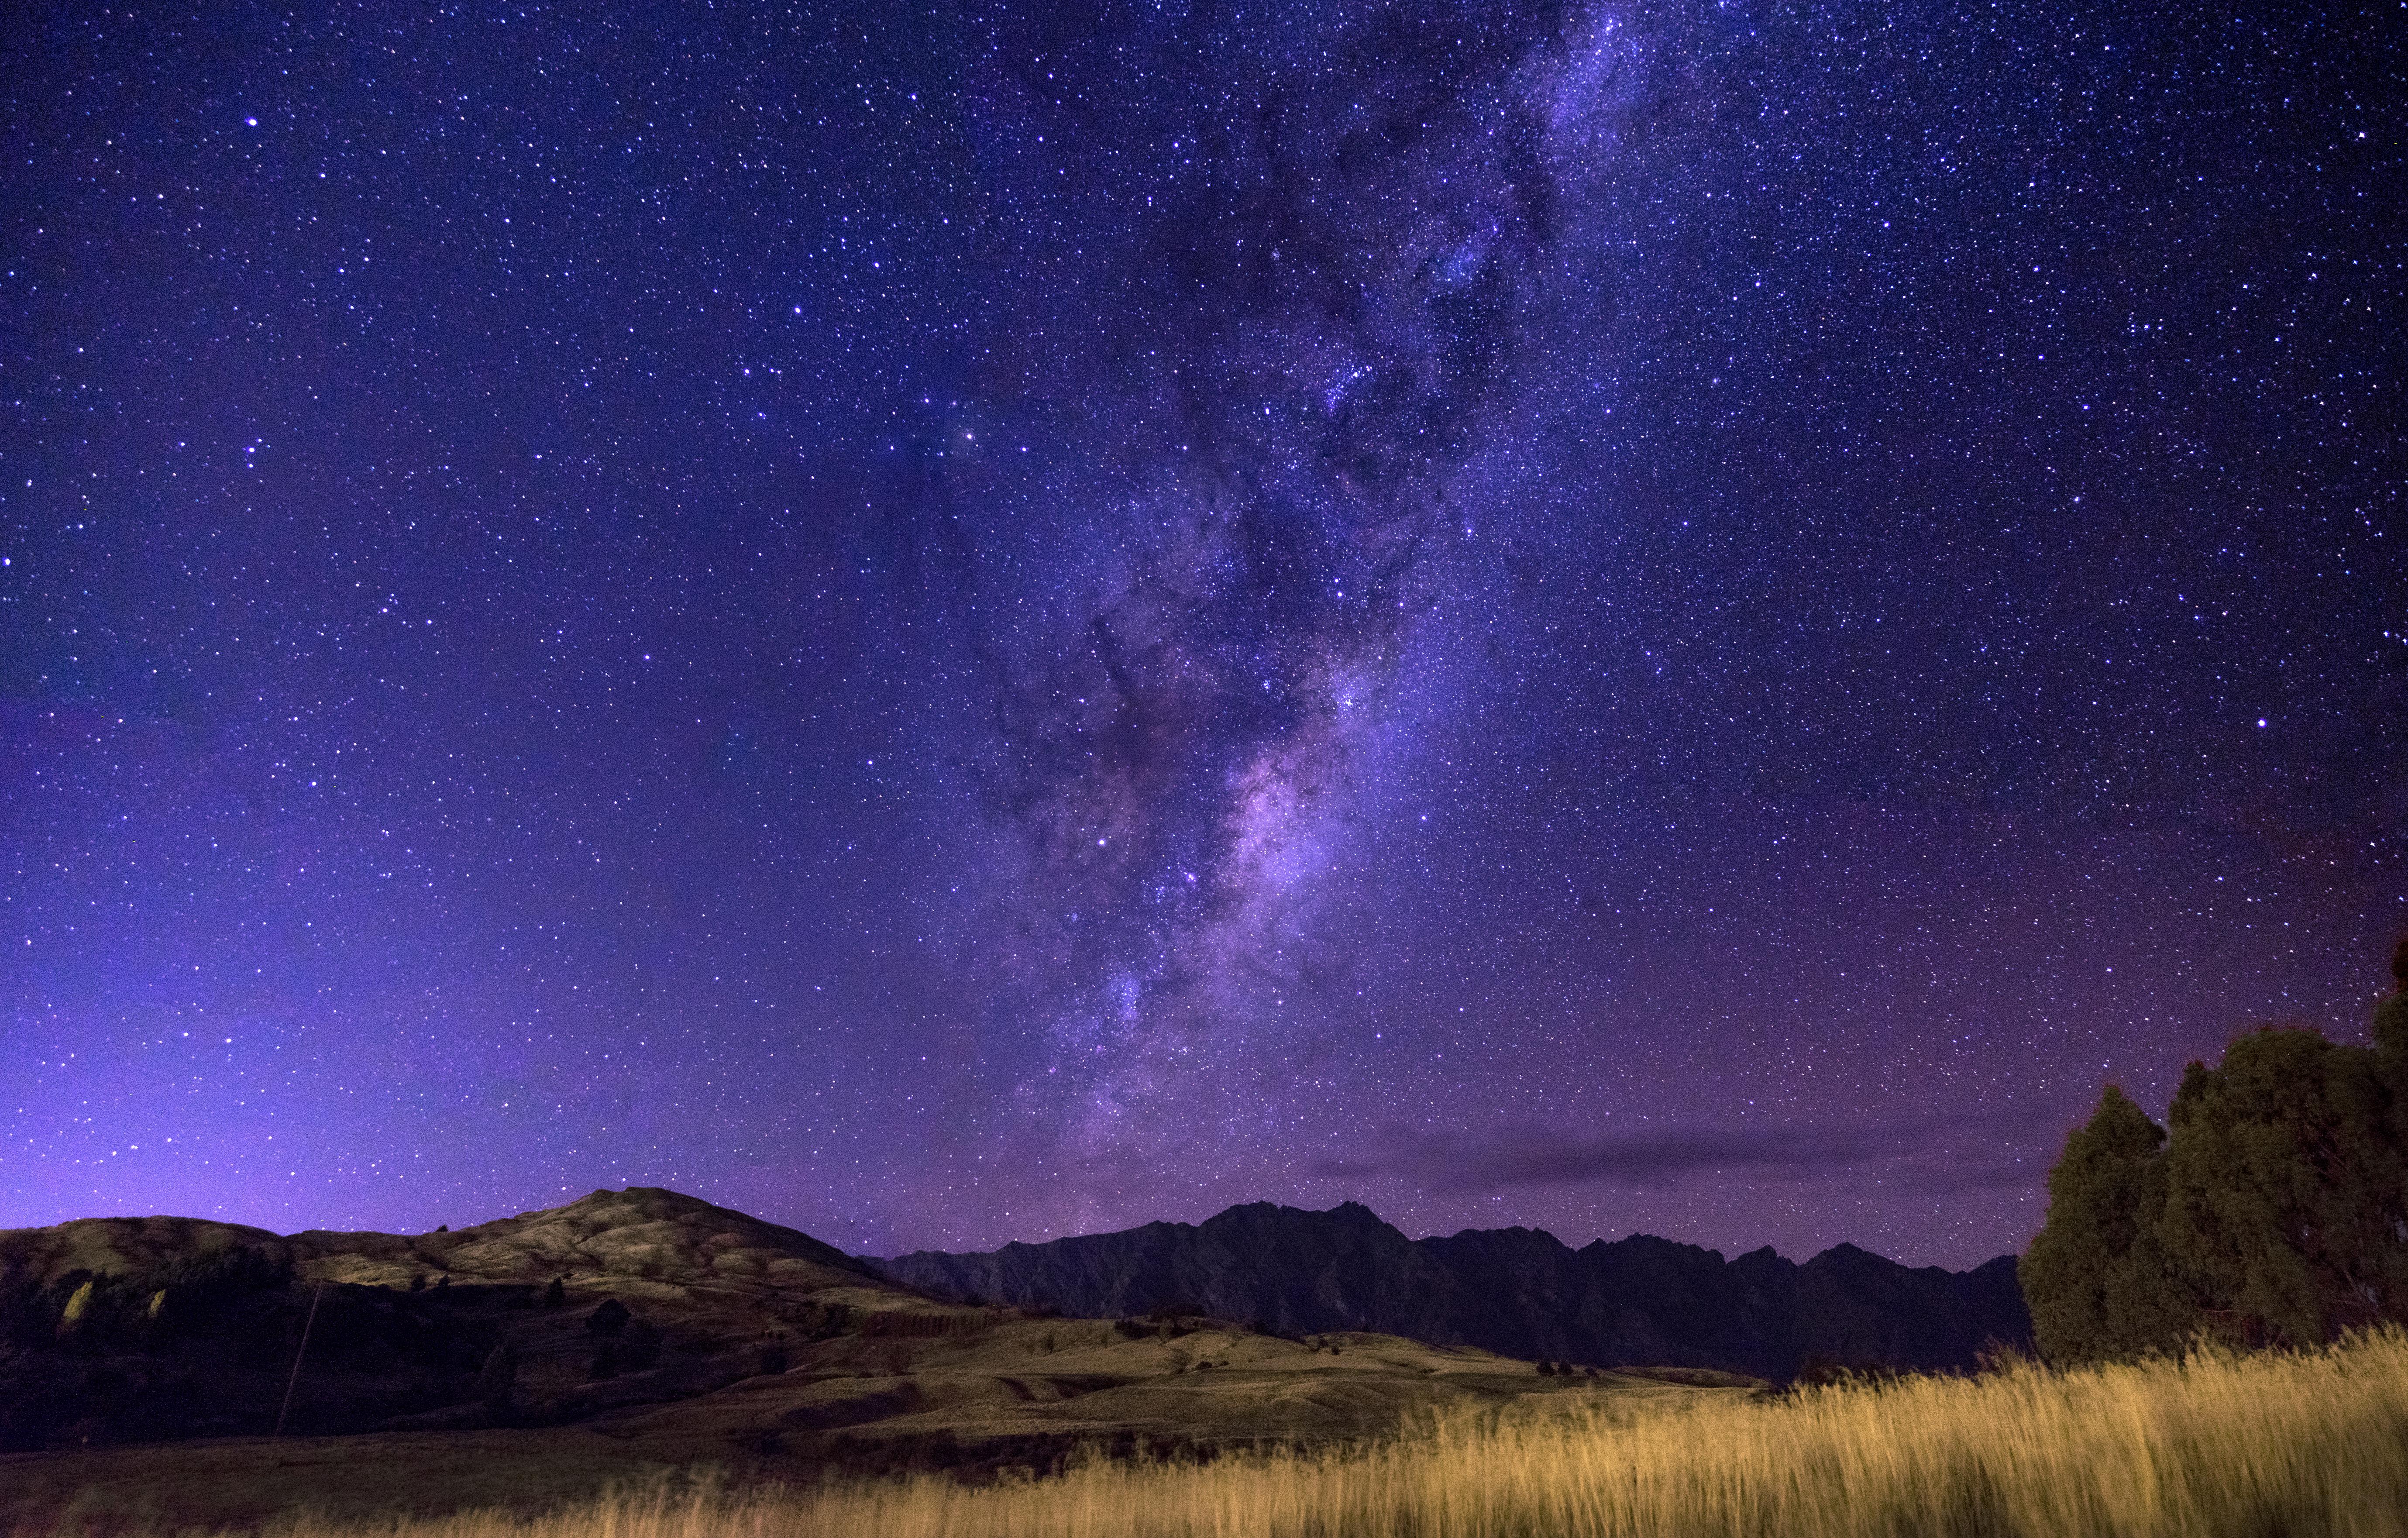 Wallpaper for mobile devices night, nature, horizon, starry sky